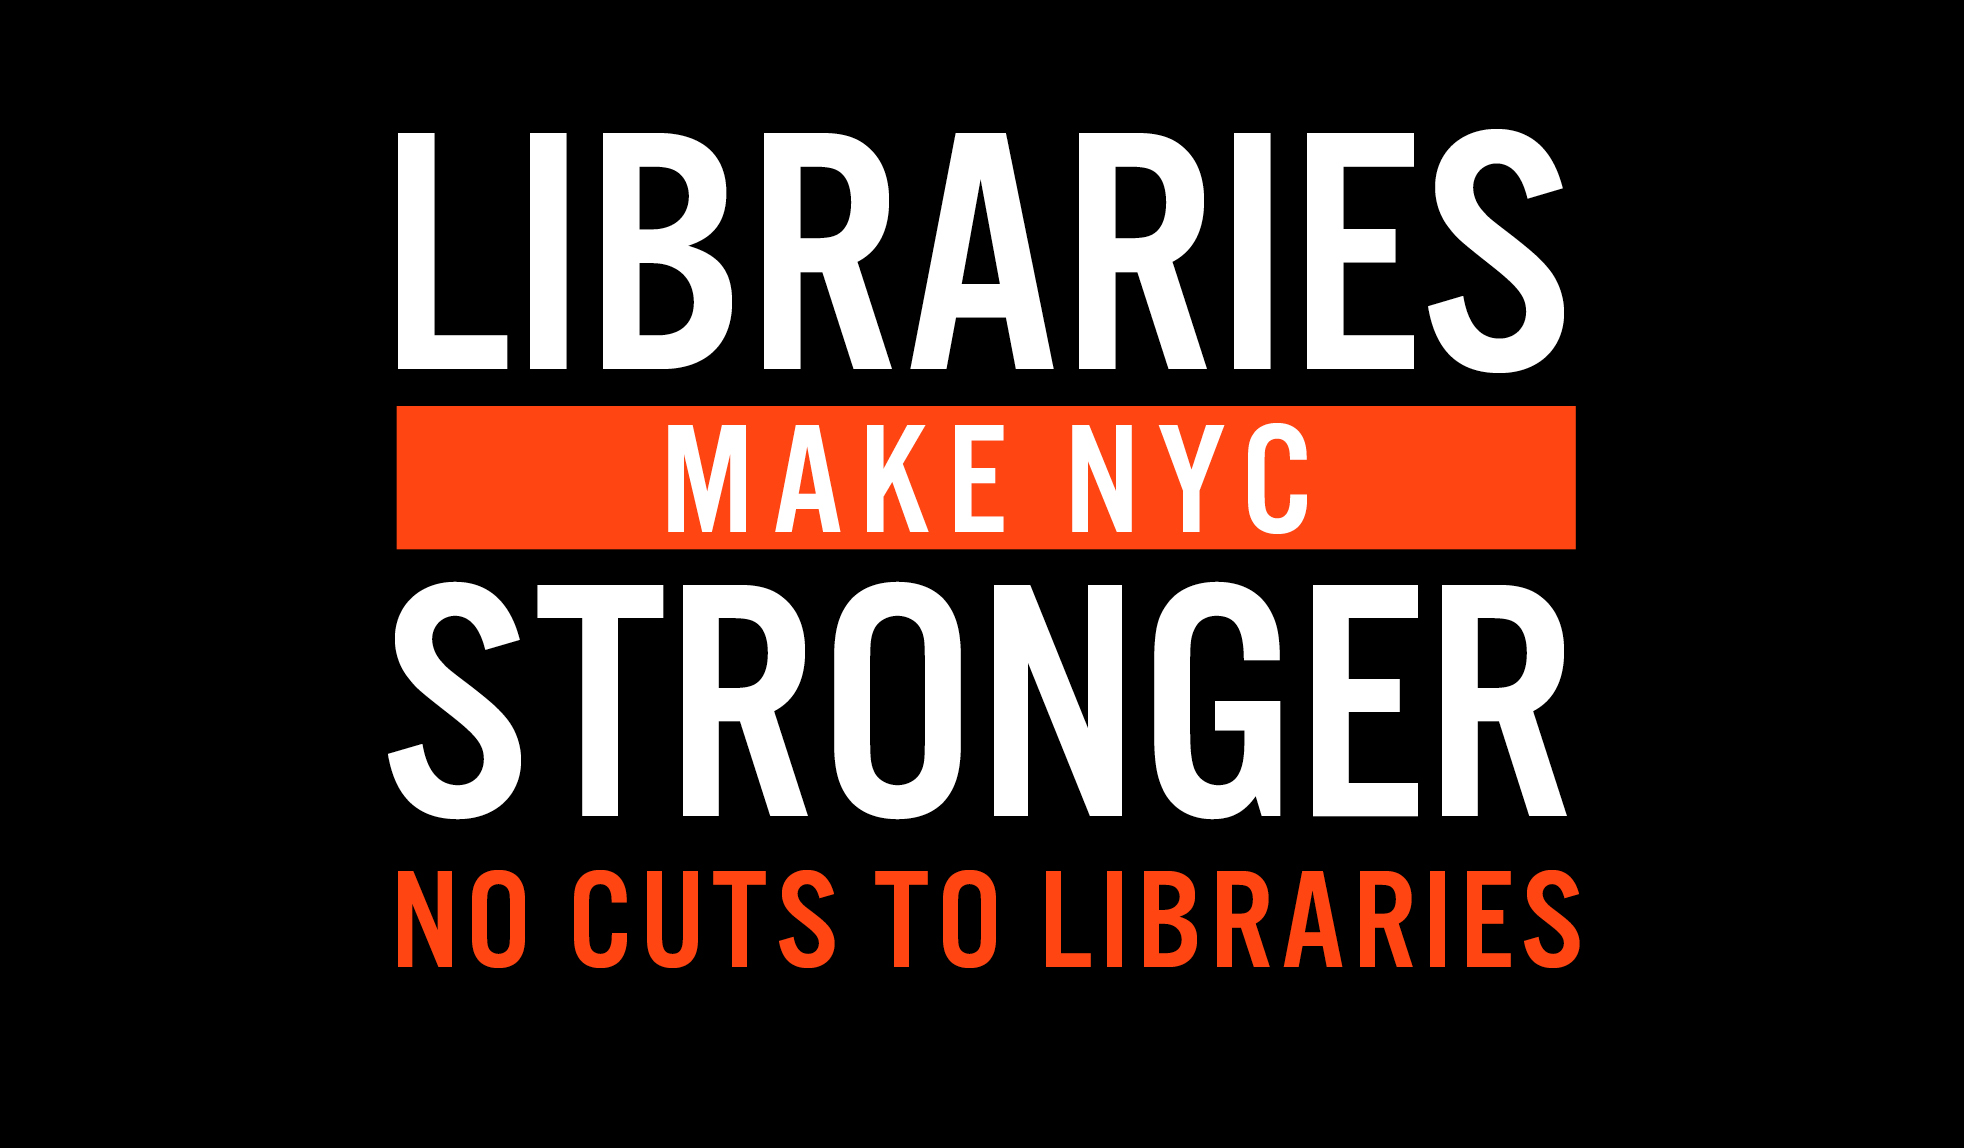 Tell our elected officials: No Cuts to Libraries!